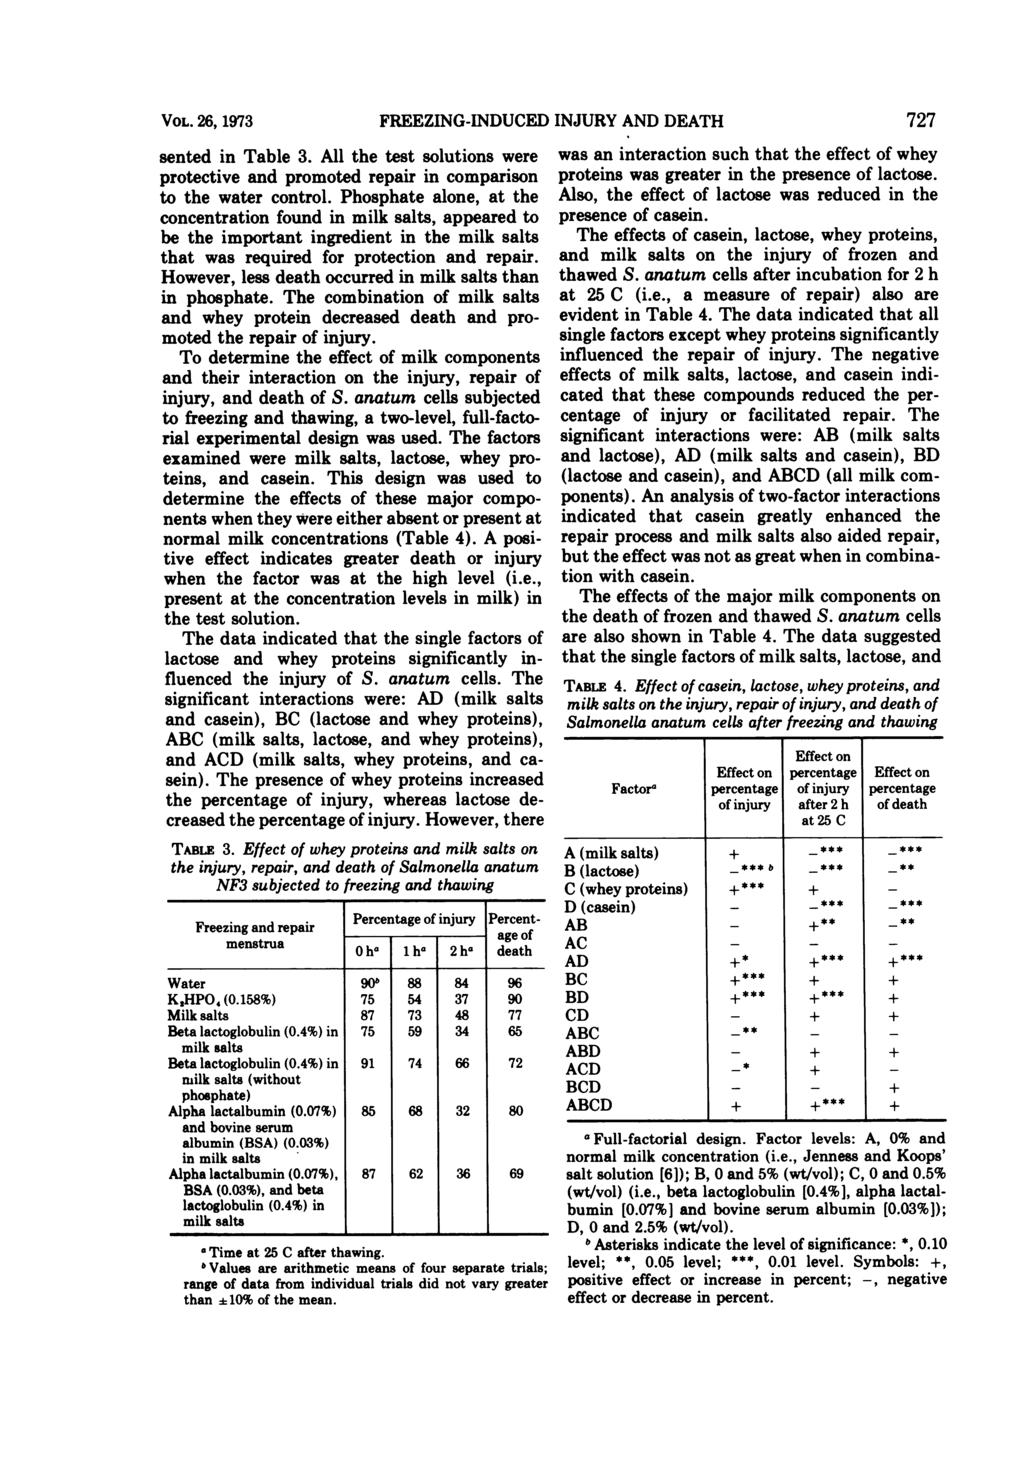 VOL. 26 1973 FREEZING-INDUCED INJURY AND DEATH sented in Table 3. All the test solutions were protective and promoted repair in comparison to the water control.